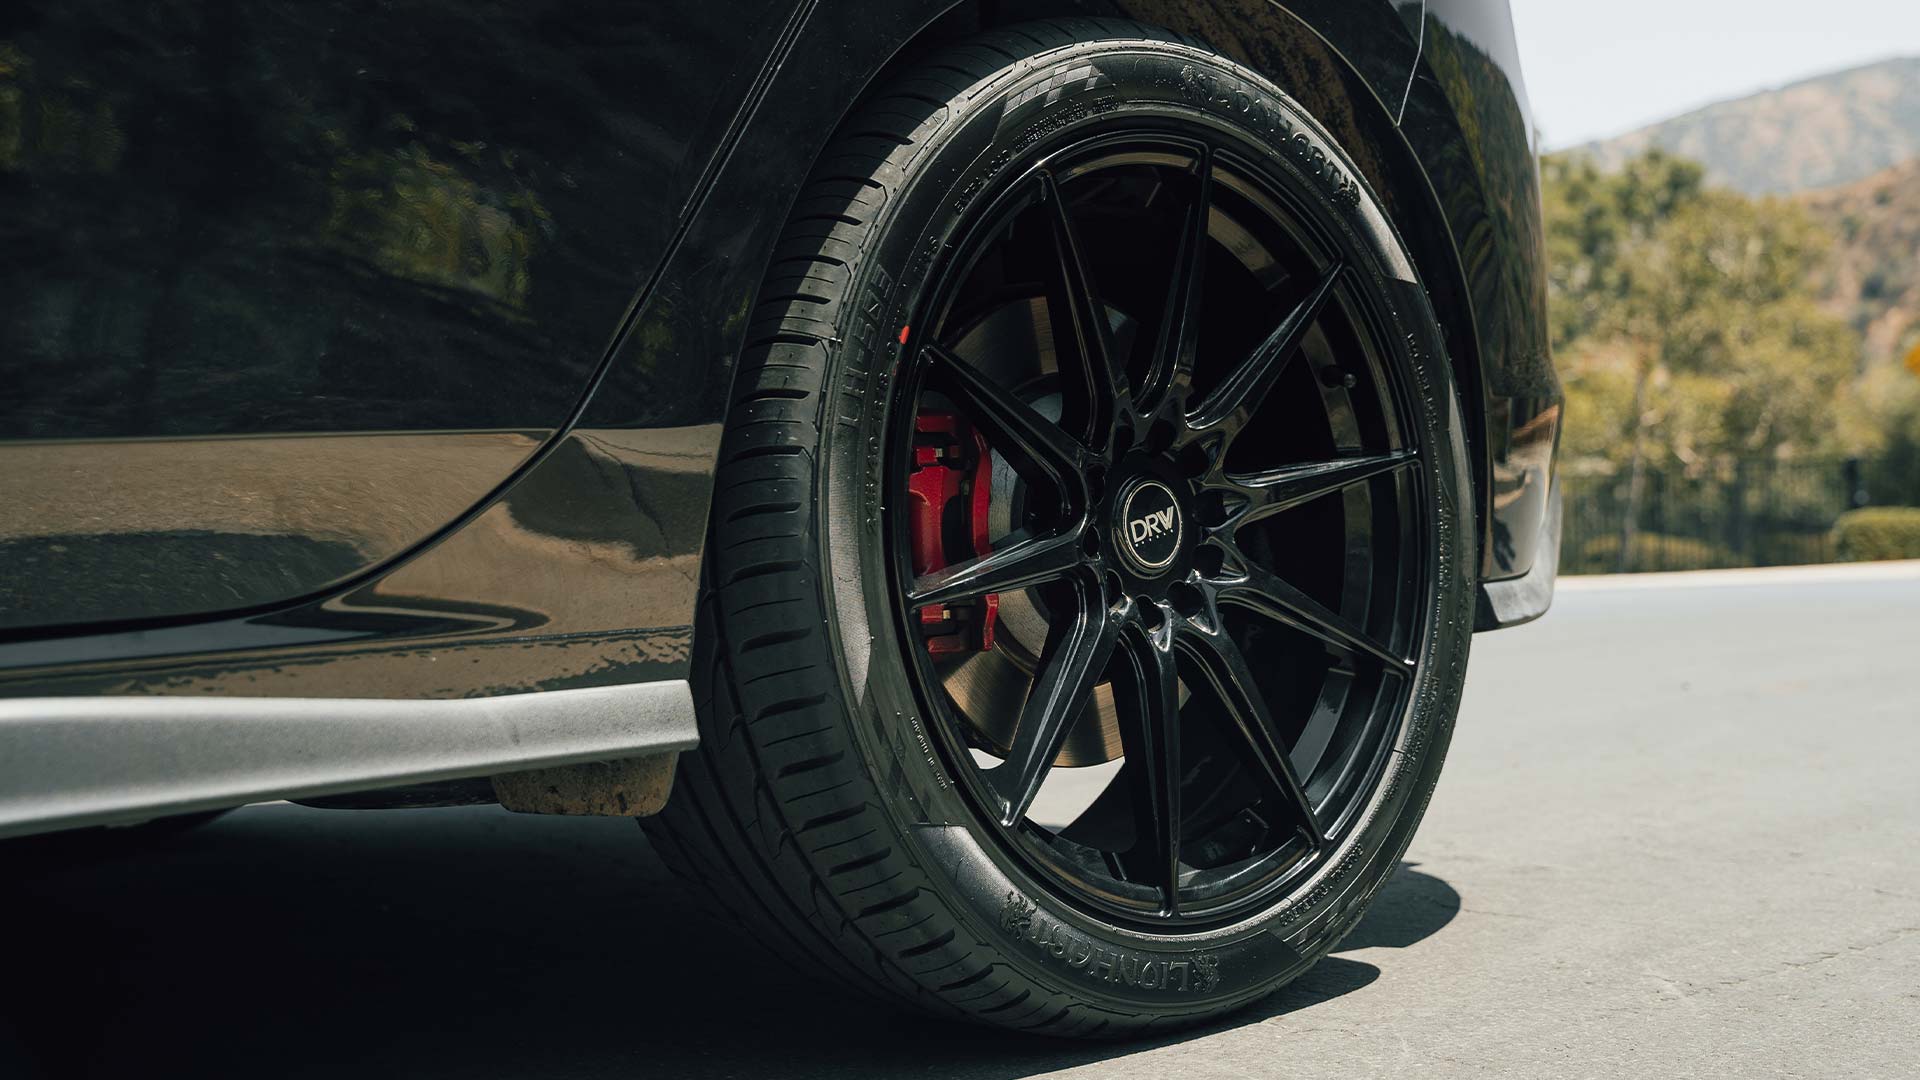 Image of a black Volkswagen GTI with Lionhart Tires